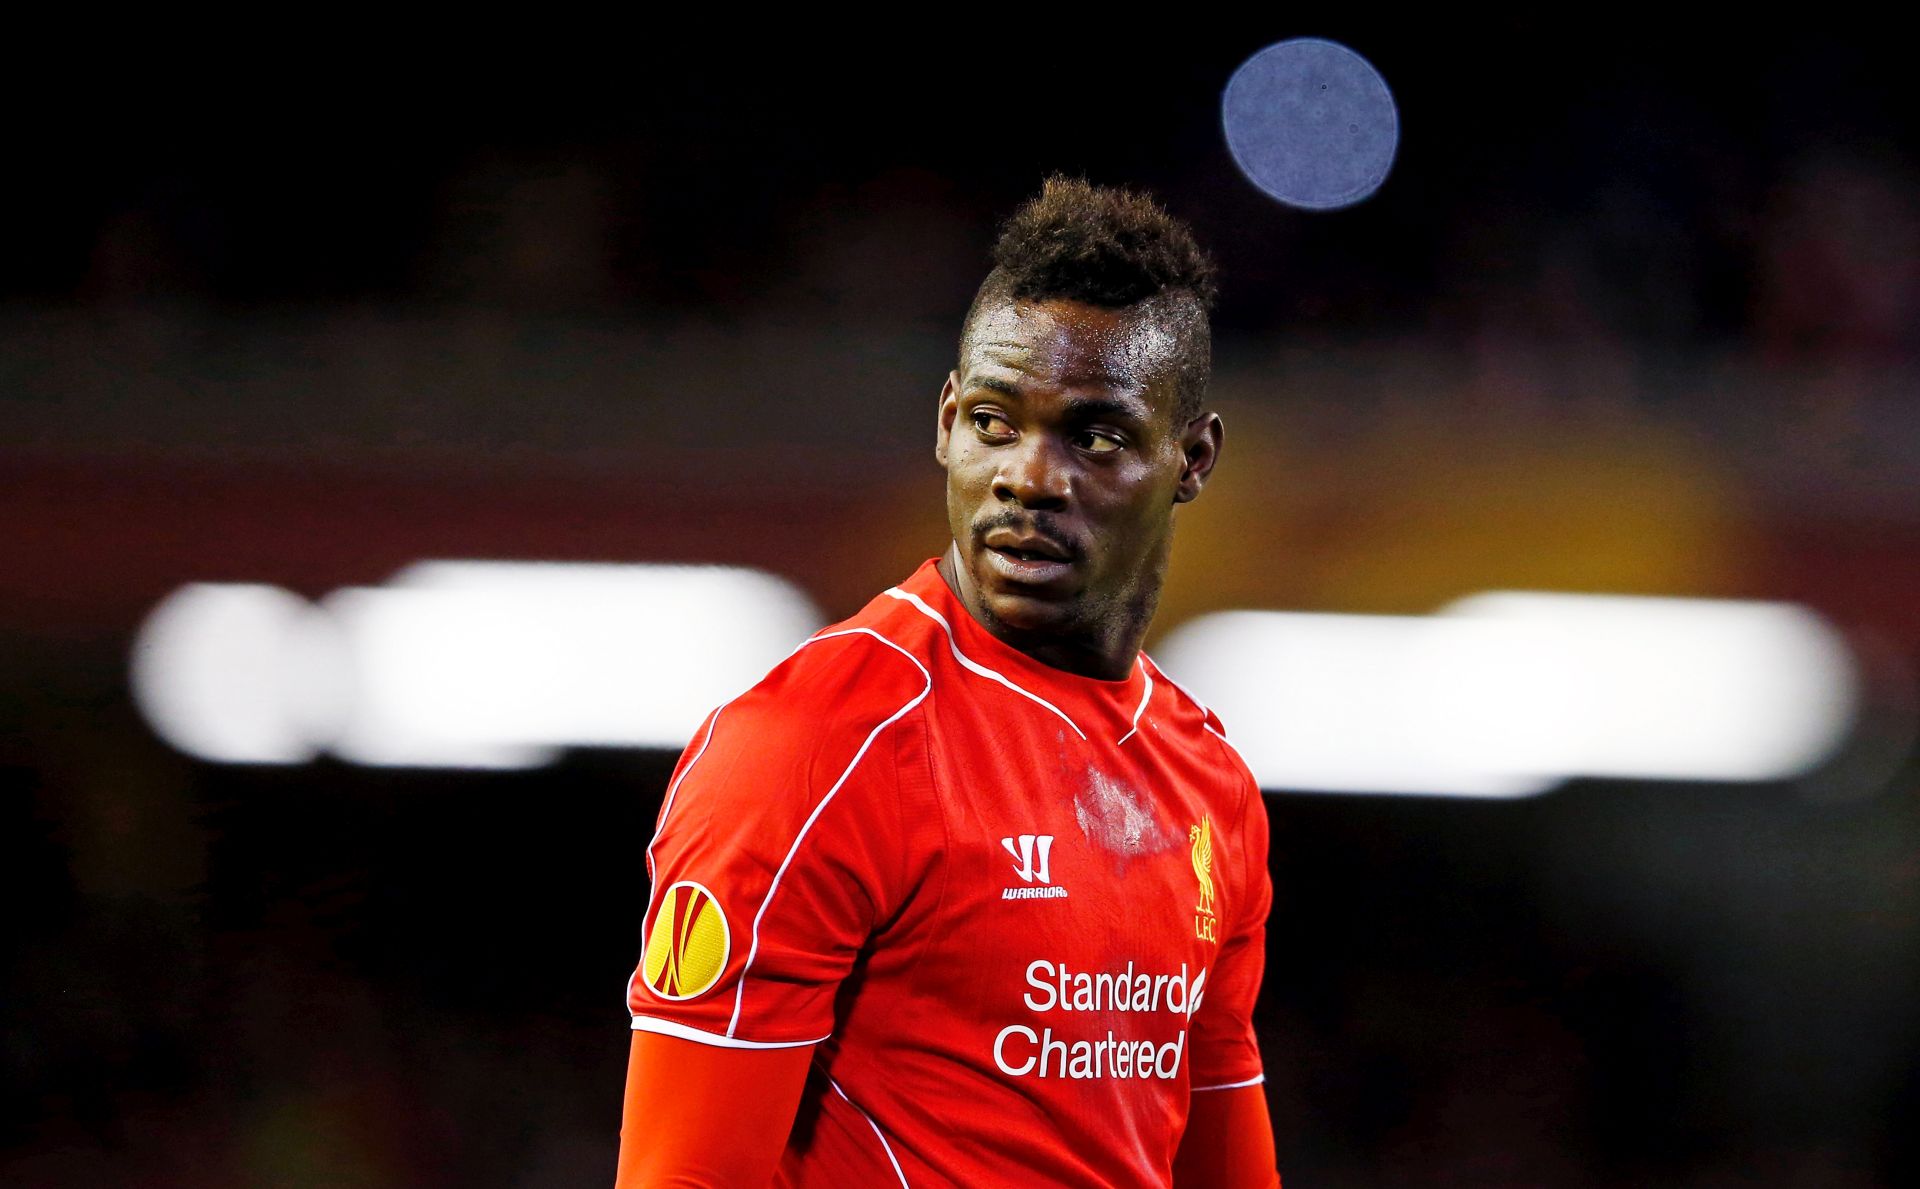 LIVERPOOL, ENGLAND - FEBRUARY 19:  Mario Balotelli of Liverpool looks on during the UEFA Europa League Round of 32 match between Liverpool FC and Besiktas JK at Anfield on February 19, 2015 in Liverpool, United Kingdom.  (Photo by Julian Finney/Getty Images)